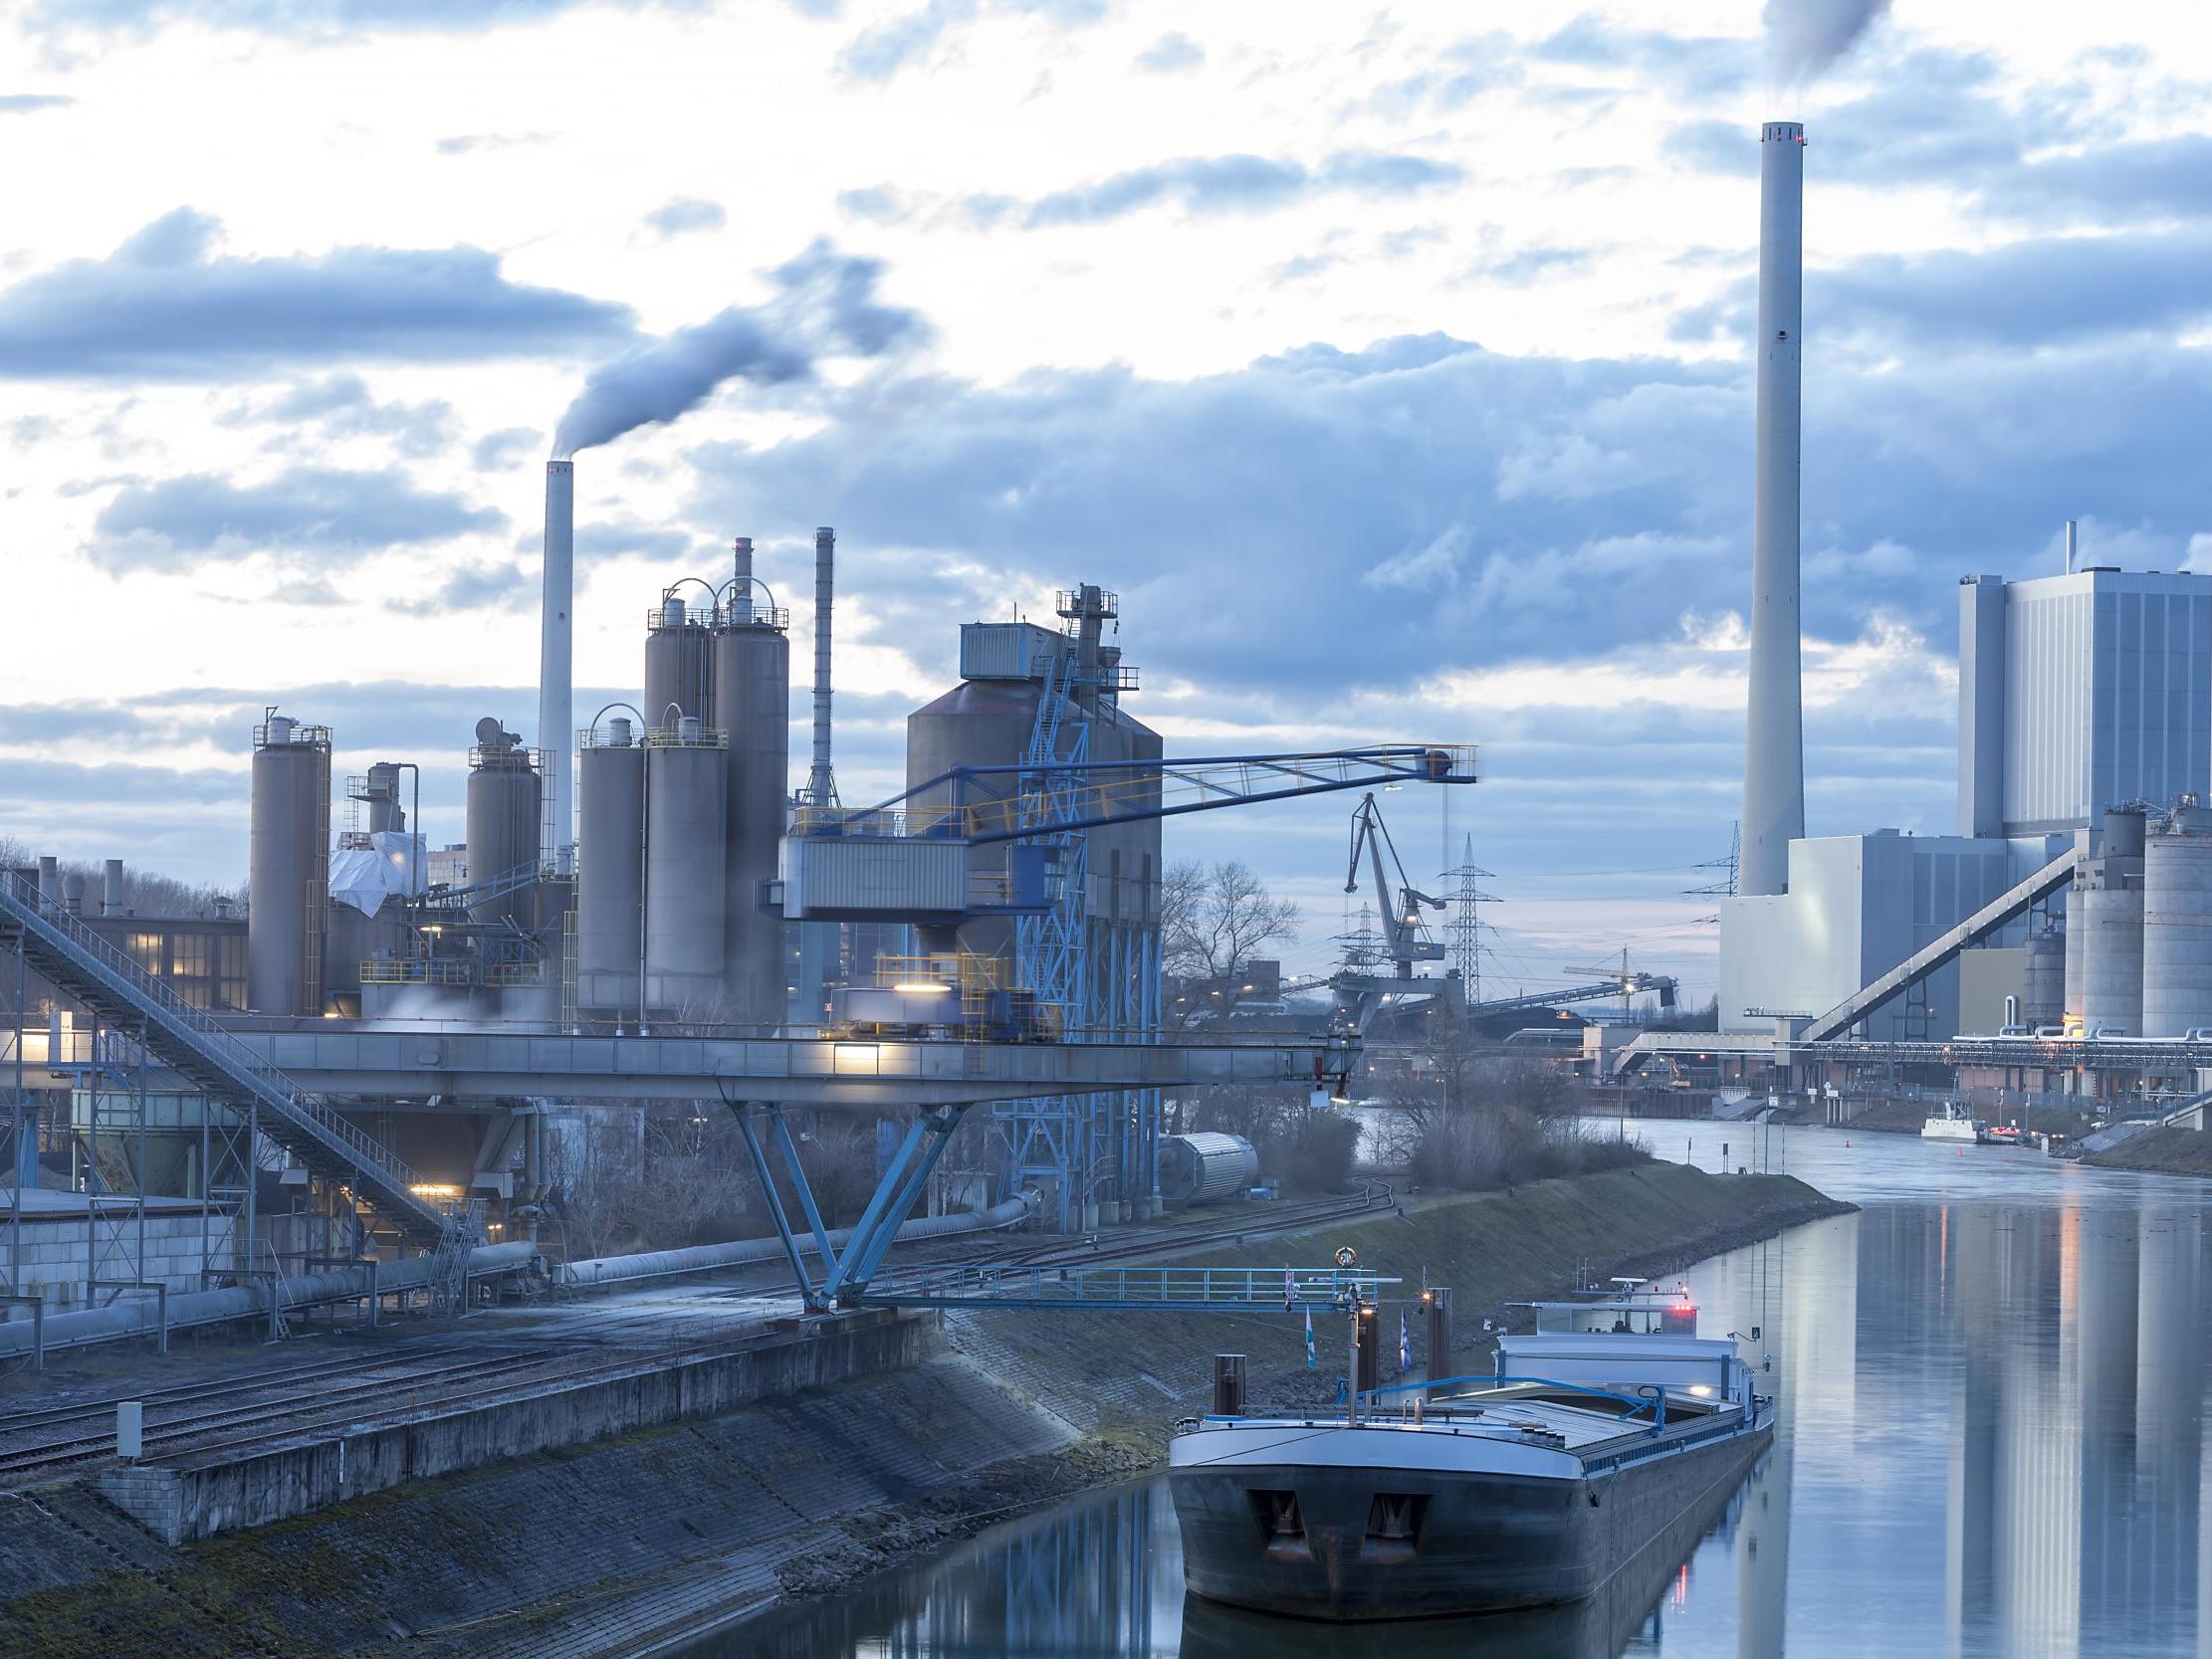 Germany is still largely dependent on coal for power generation